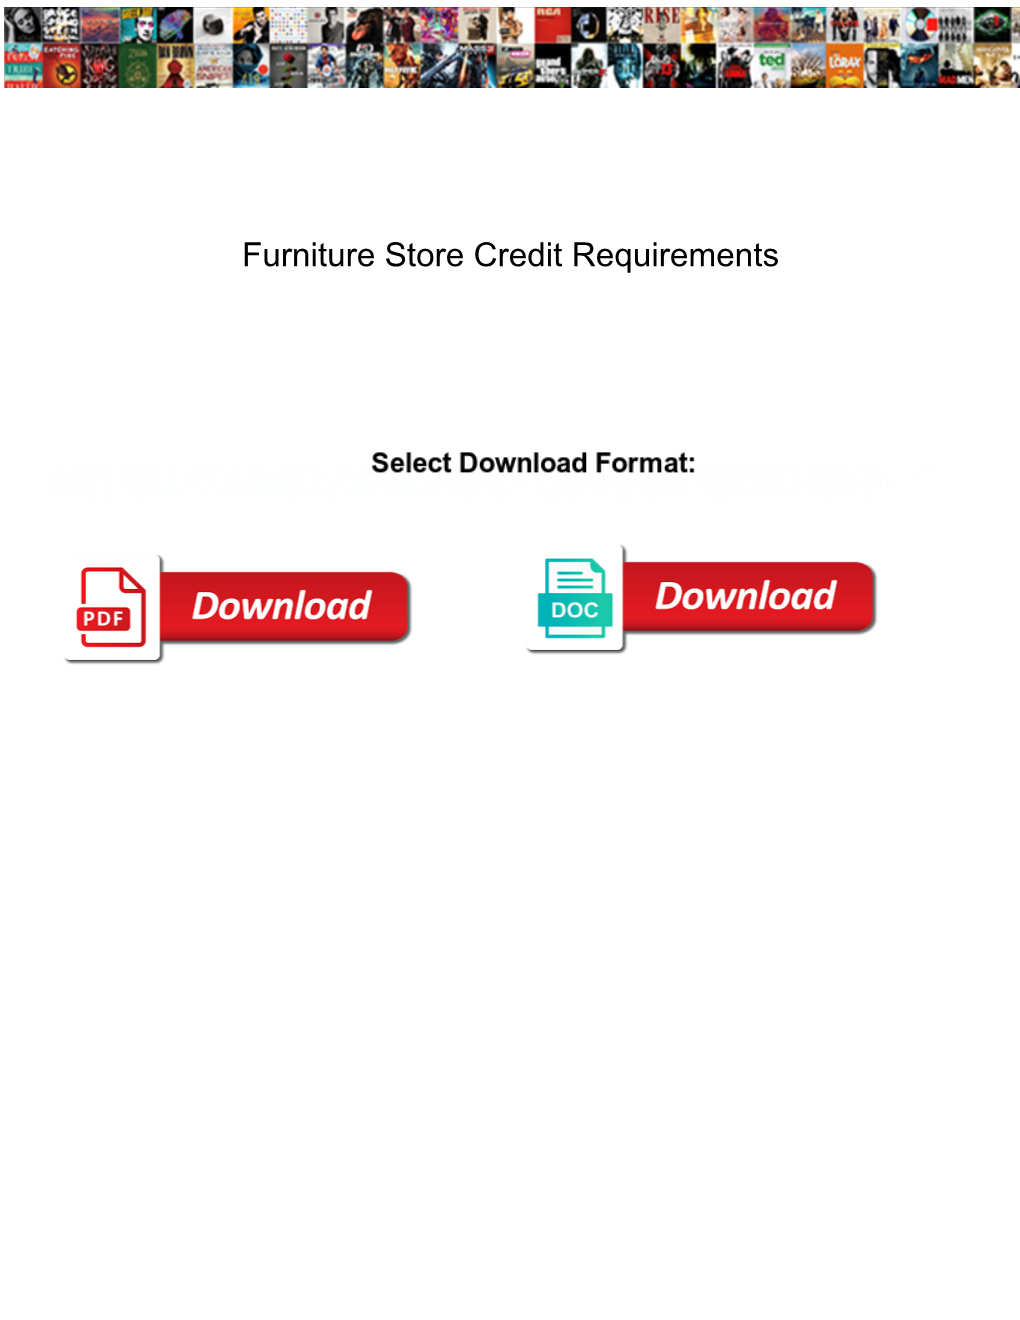 Furniture Store Credit Requirements